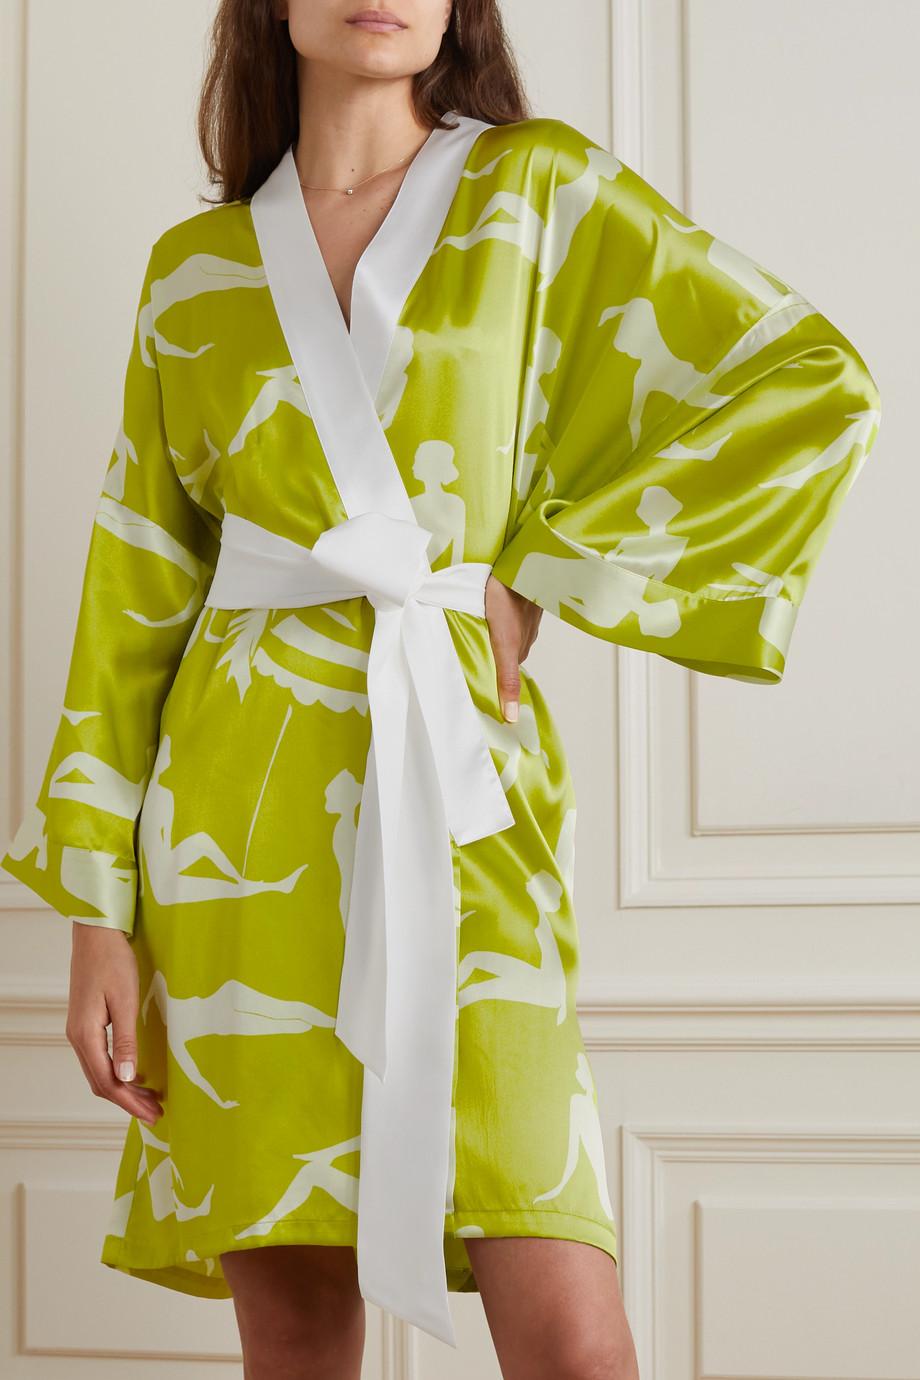 Olivia von Halle's robe is cut from soft silk-satin in a kimono-inspired silhouette. It is in lime color printed all-over with silhouette print. Finished piping, it has wide sleeves.  Wear yours while lounging around the house or over a dress in the